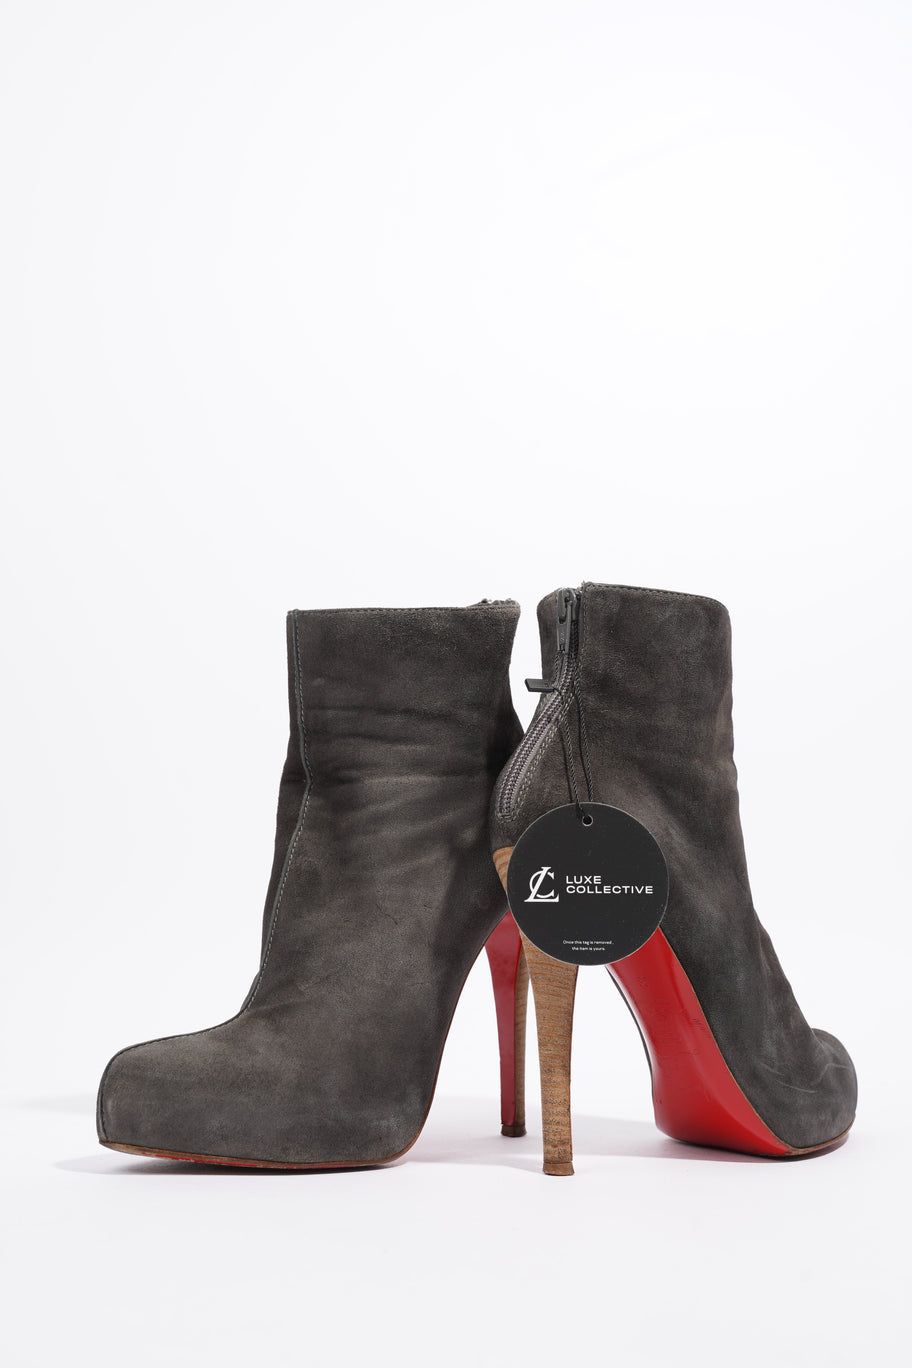 Ankle Boot Grey Suede EU 38 UK 5 Image 12